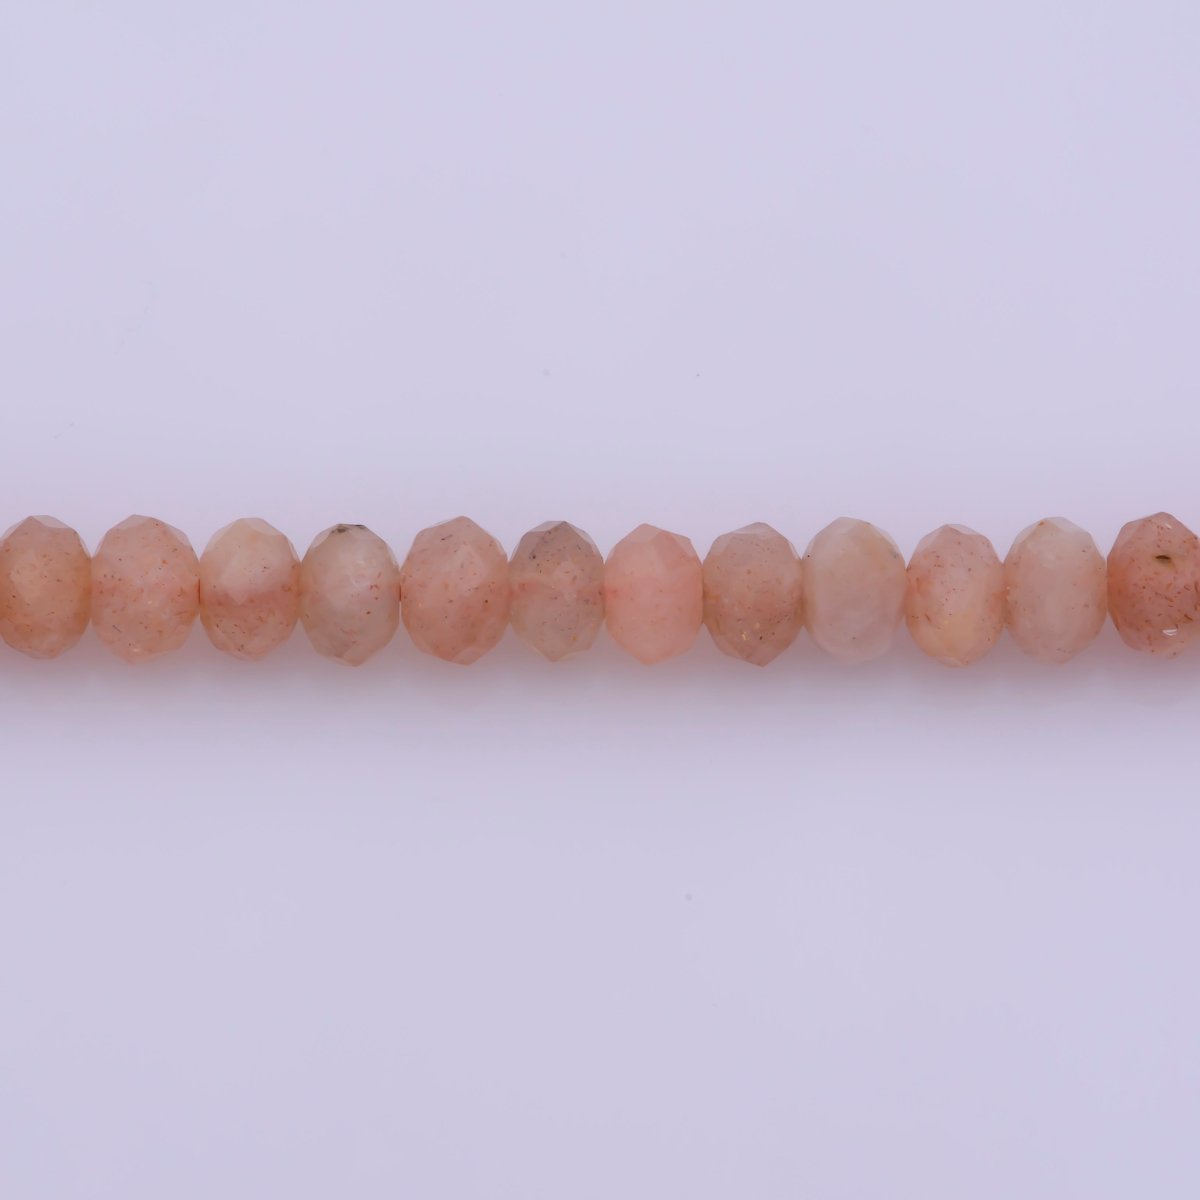 4mm Dainty Watermelon Pink Rose Quartz Natural Gemstone Bead 16.5 Inch Necklace | WA-259 Clearance Pricing - DLUXCA